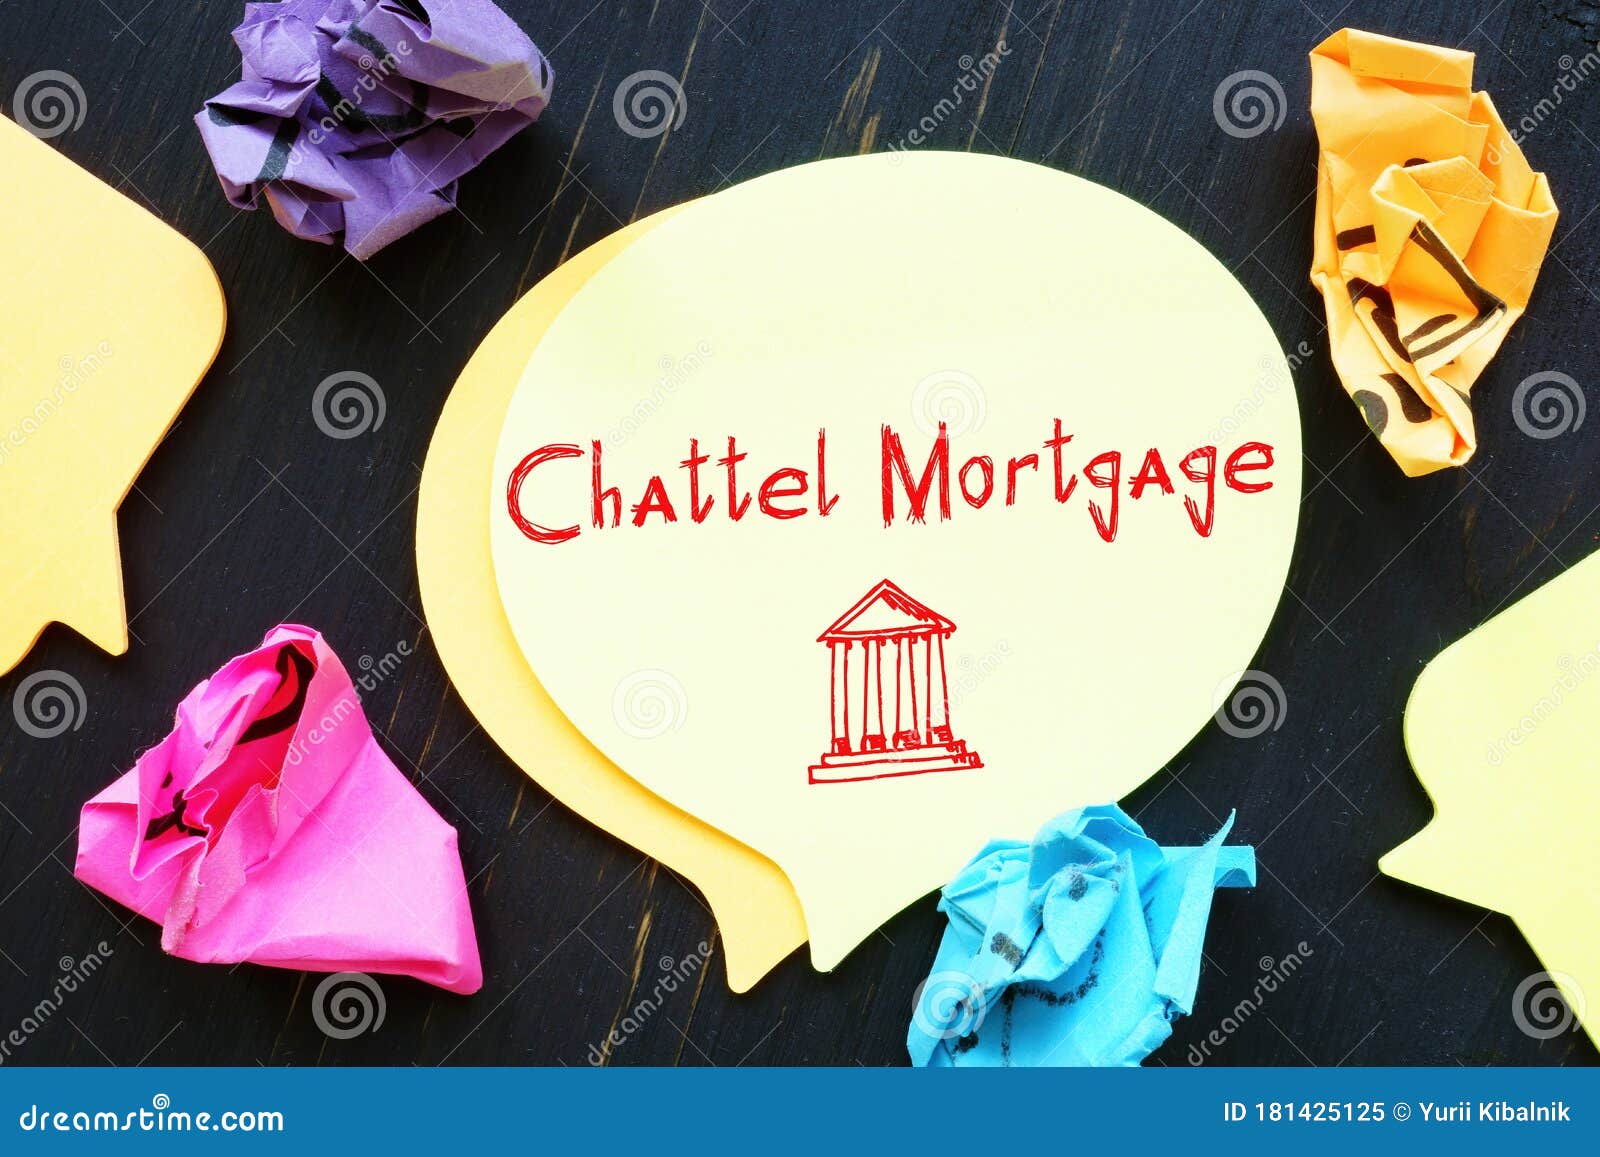 A chattel mortgage